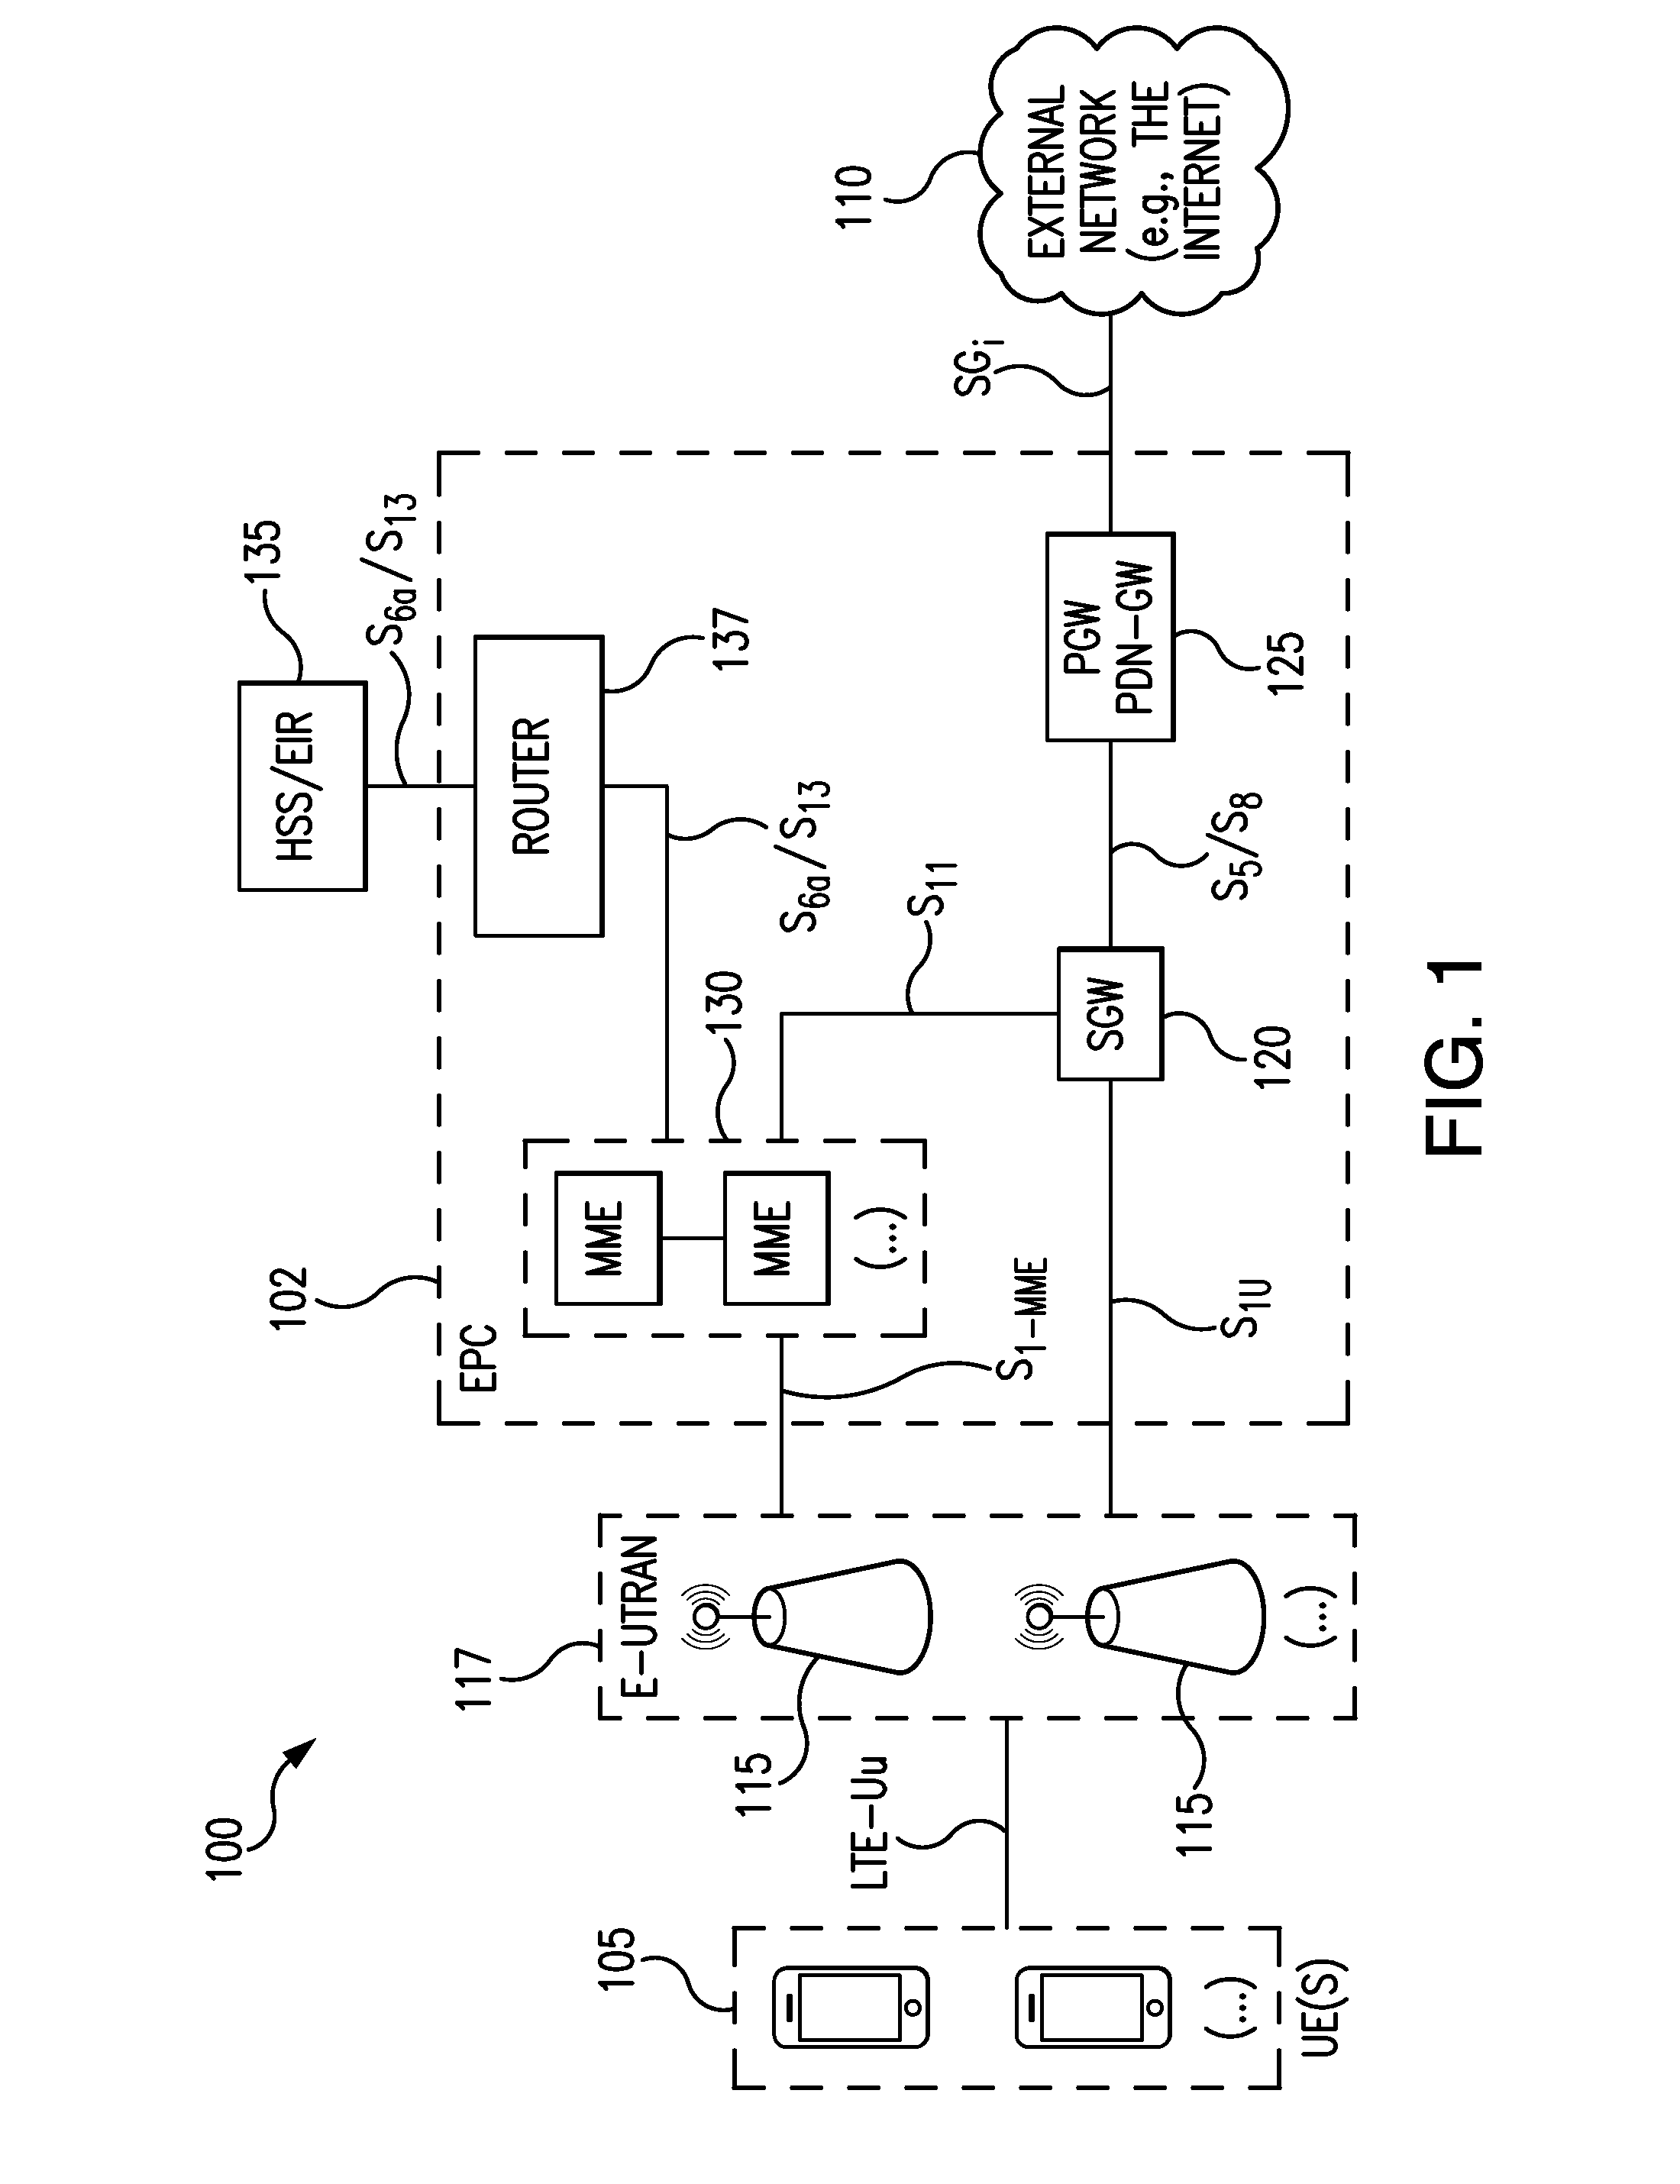 Systems, methods and devices for deriving subscriber and device identifiers in a communication network